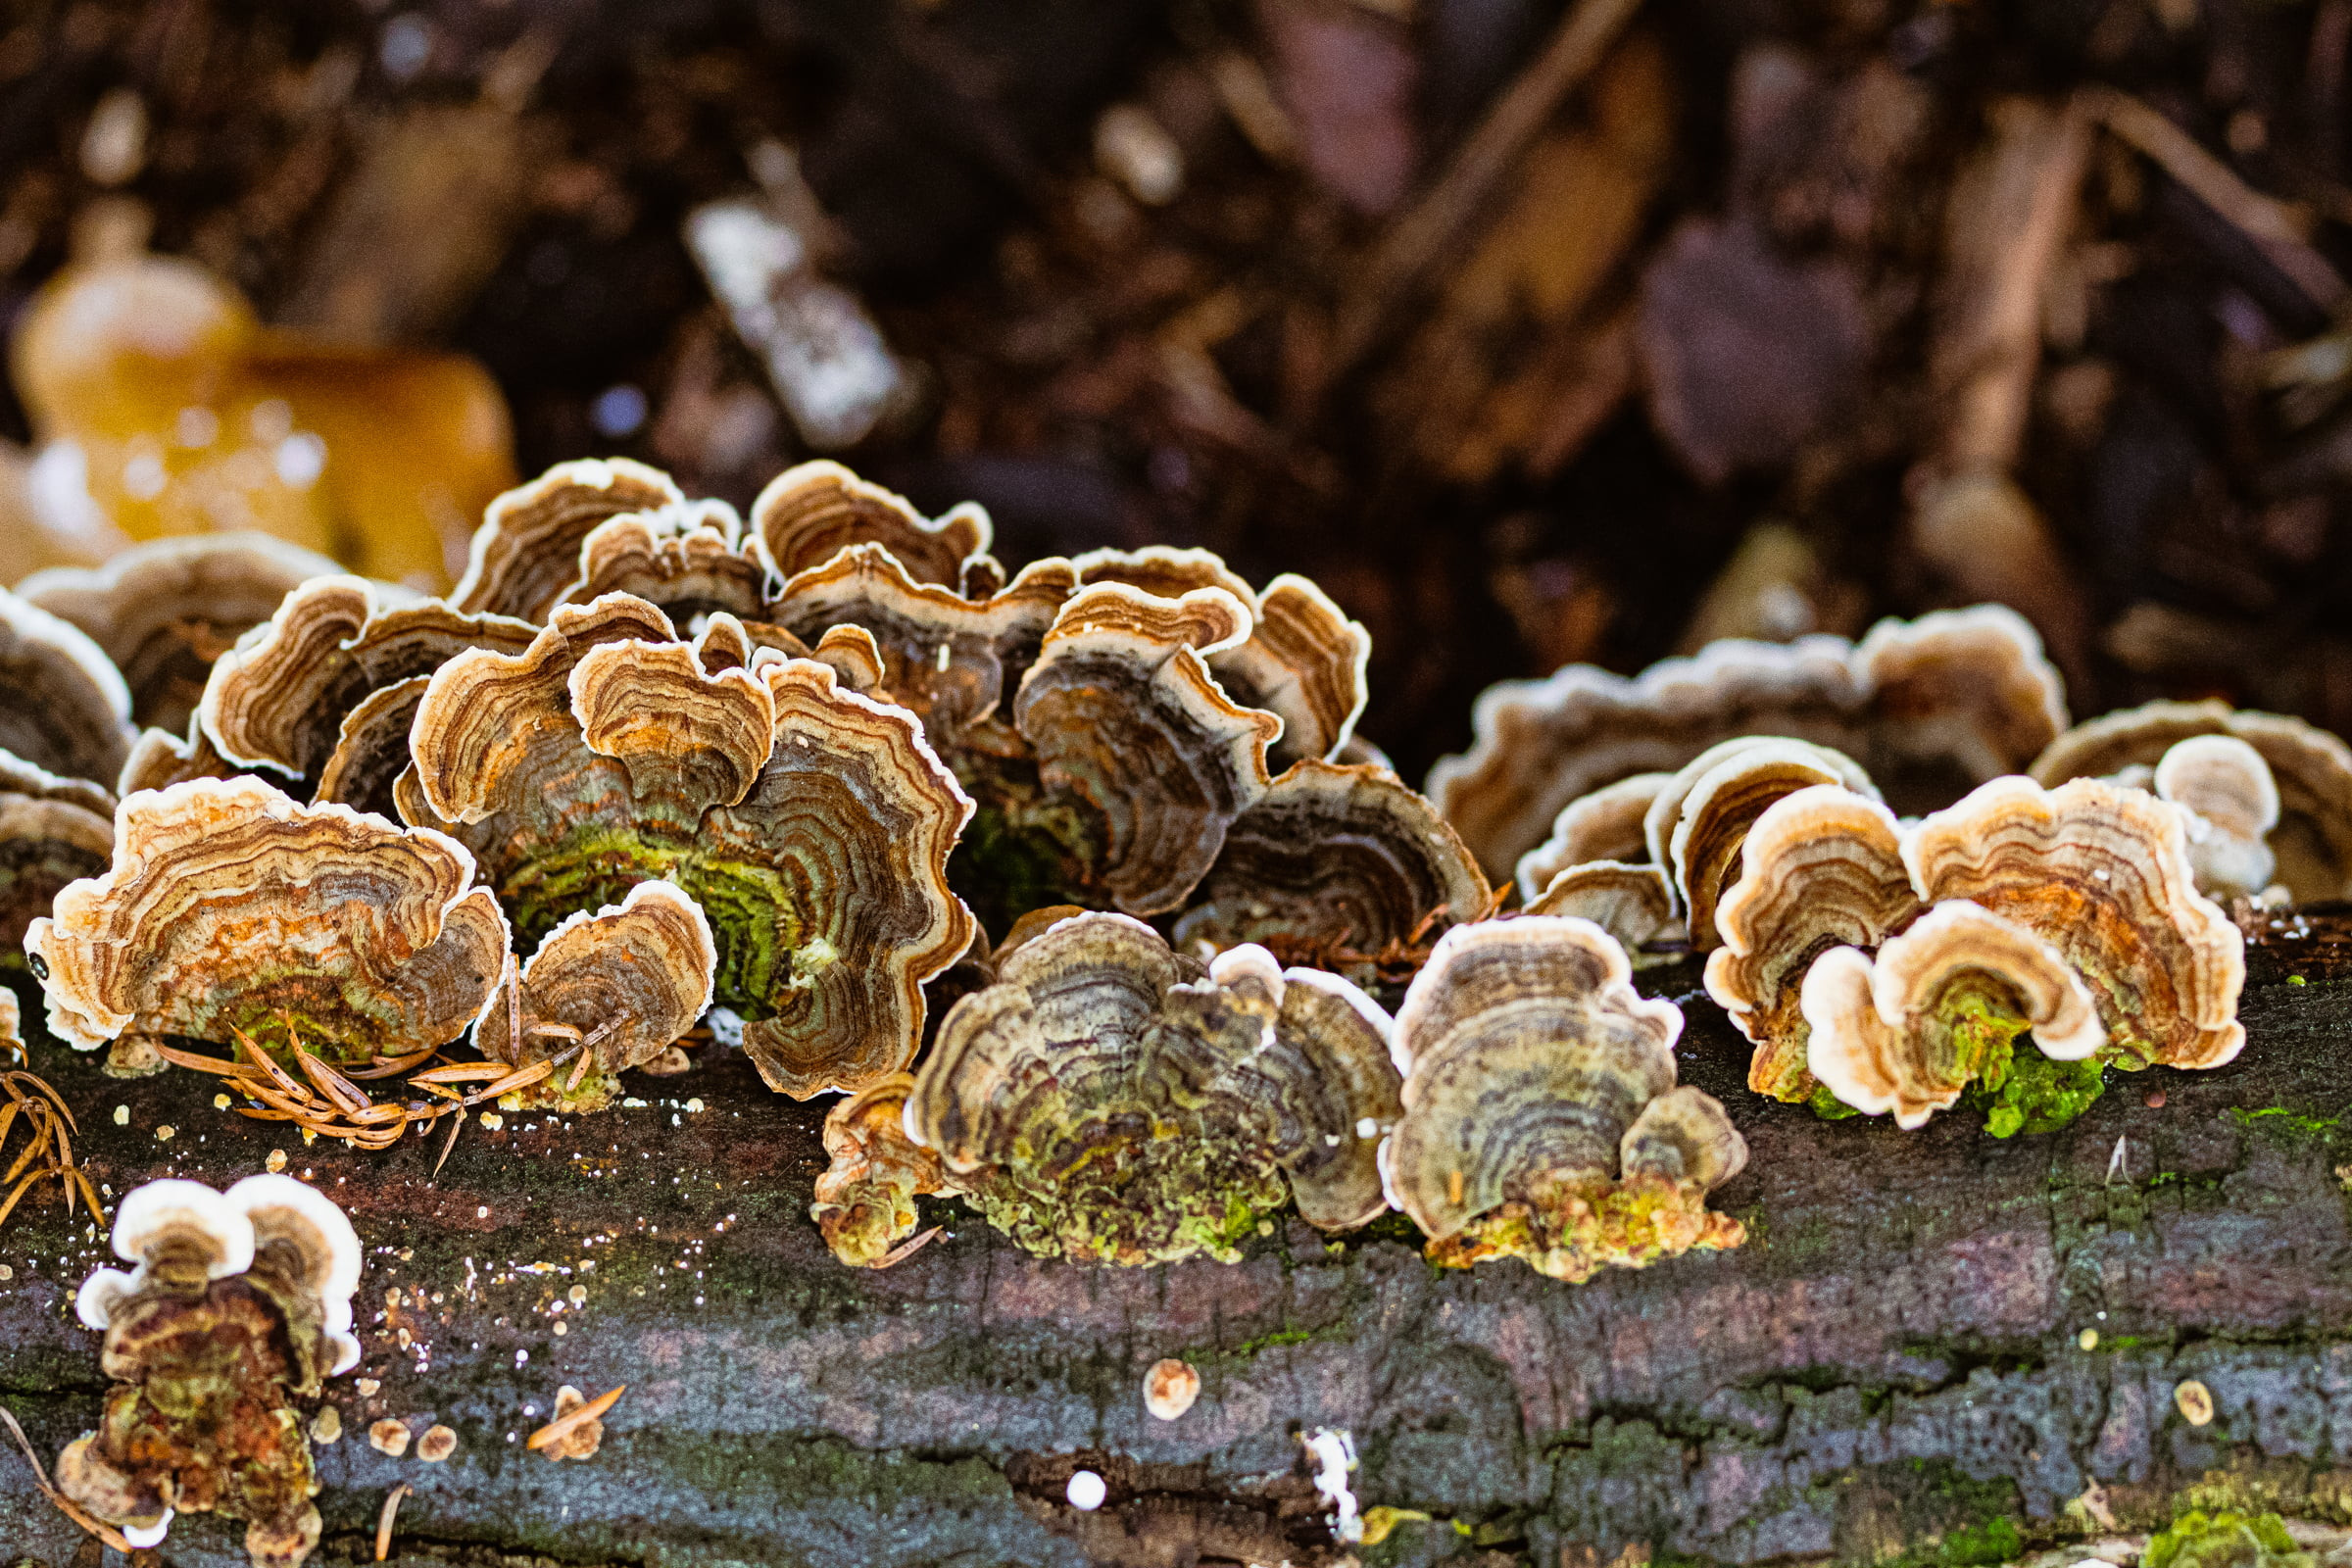 Multiple layers of fungi growing on a log.